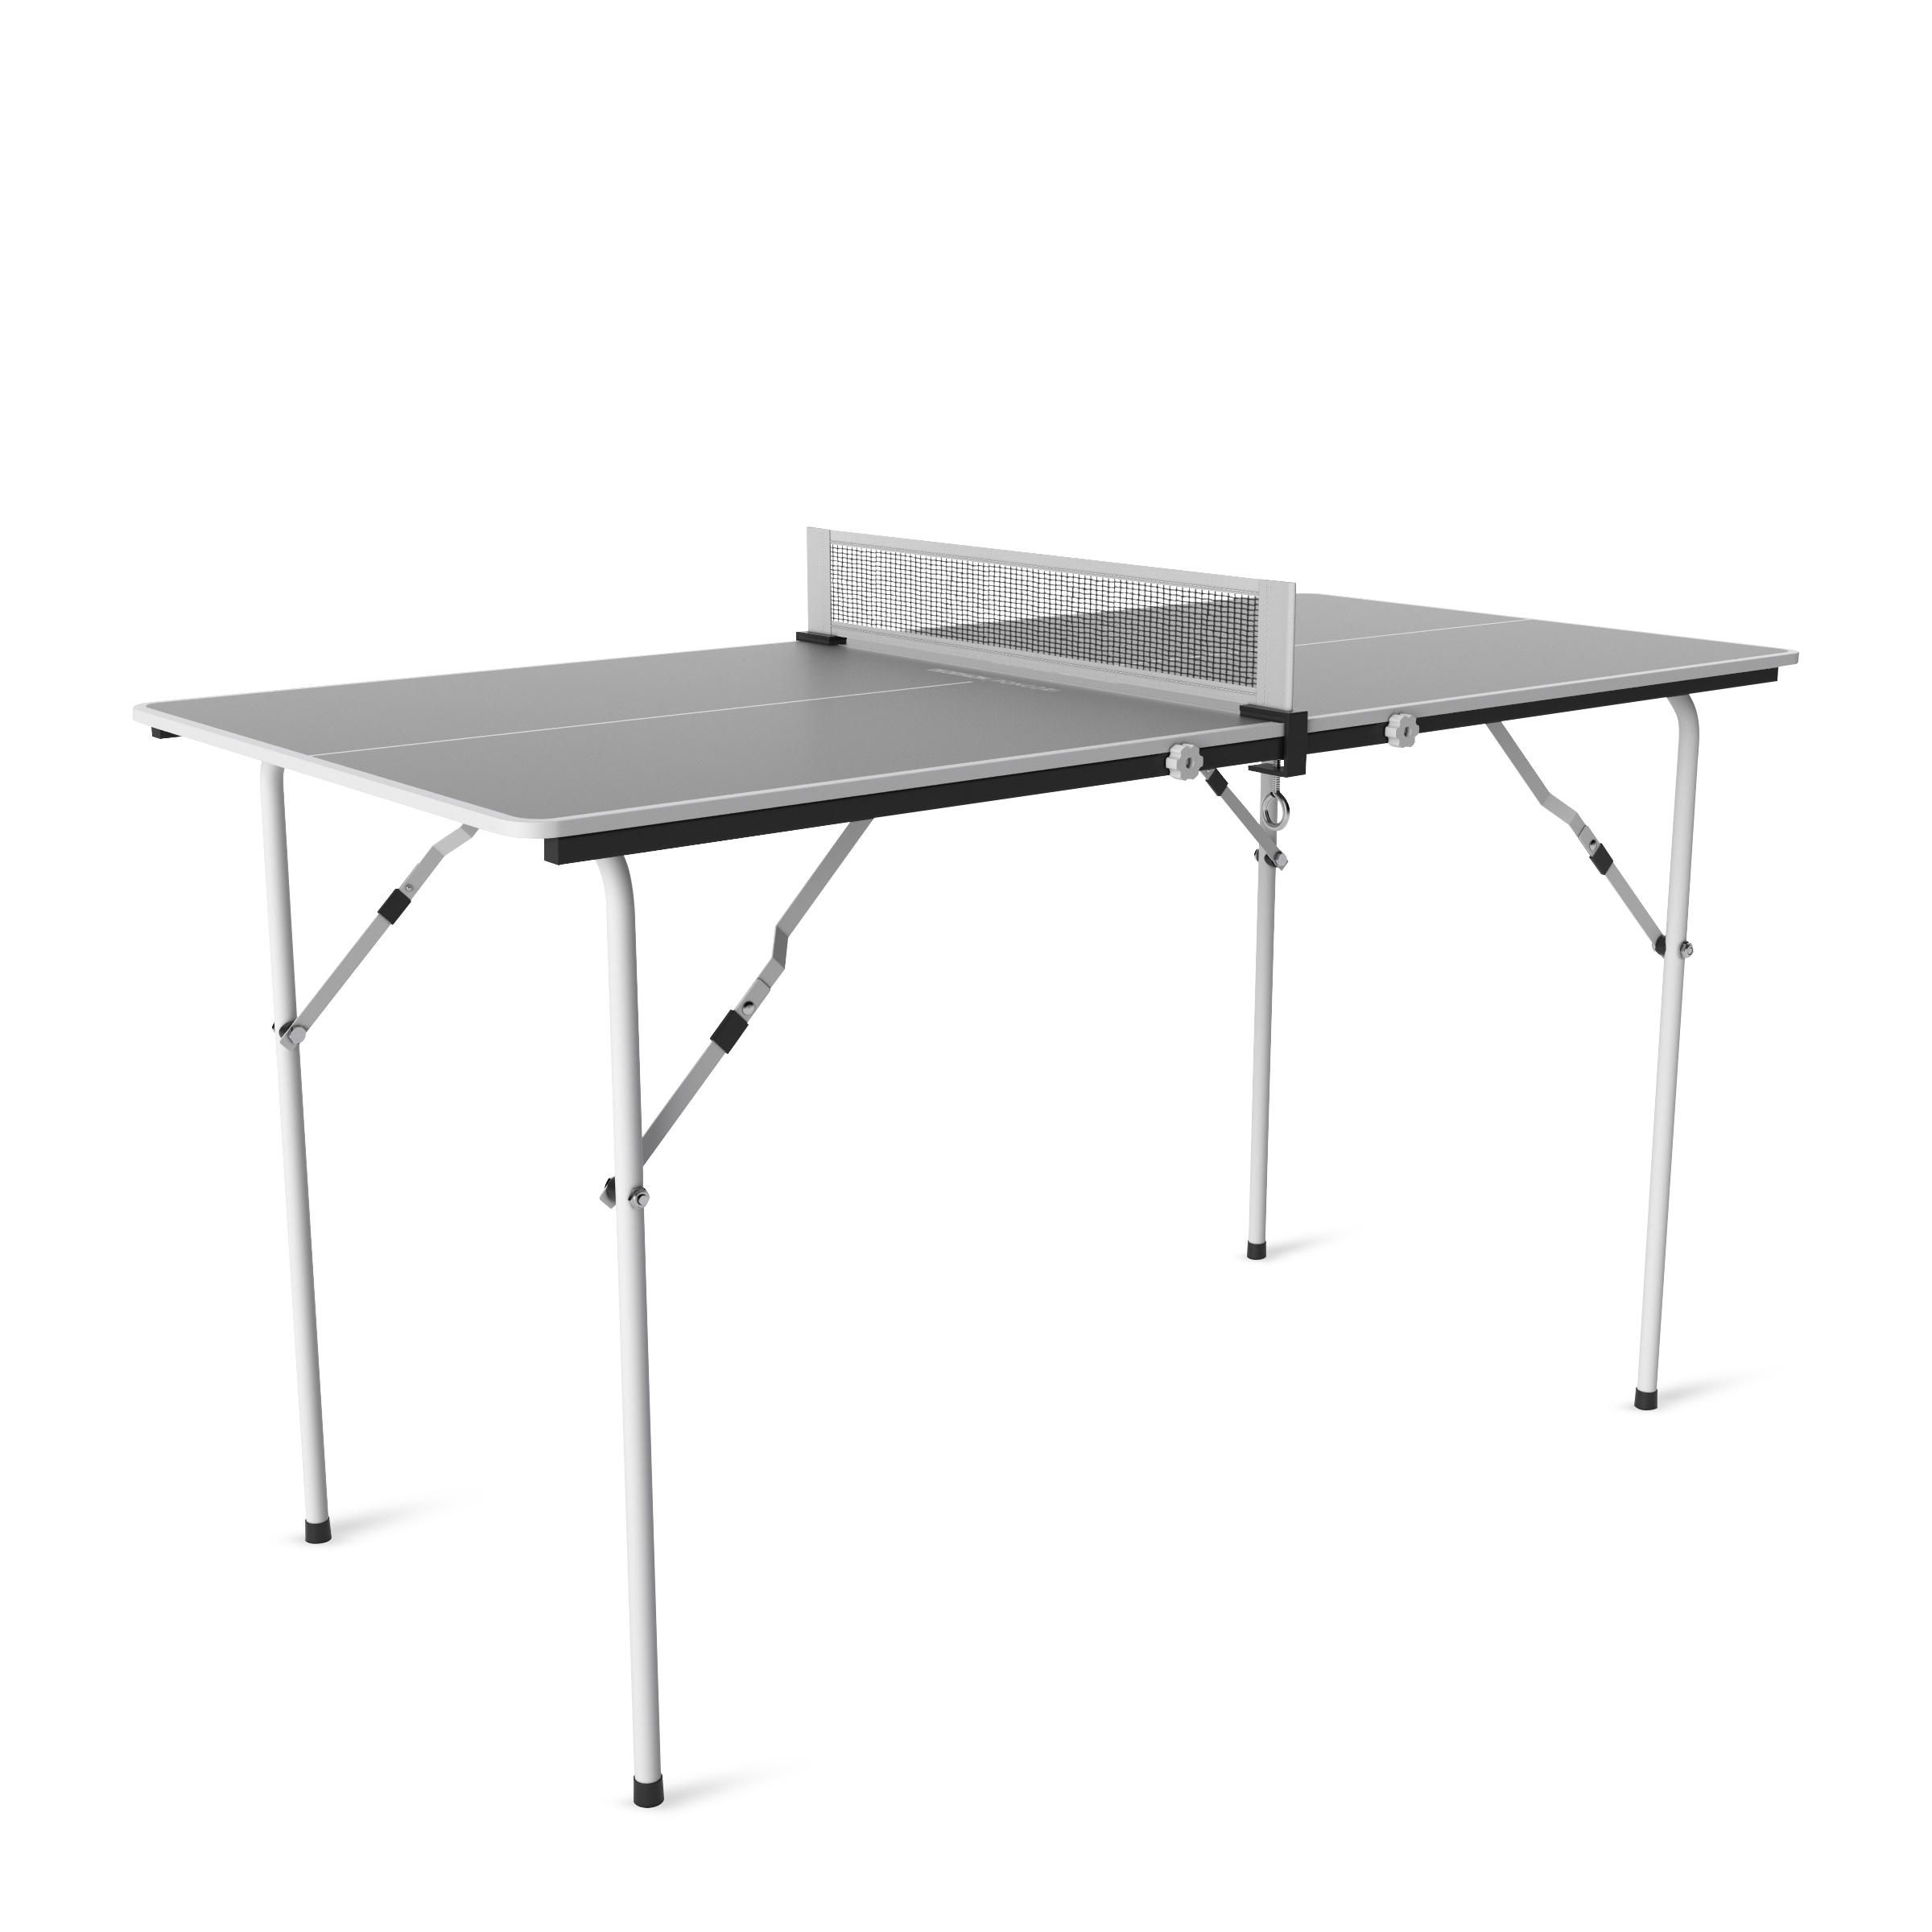 Table Tennis Table PPT 130 Small Indoor